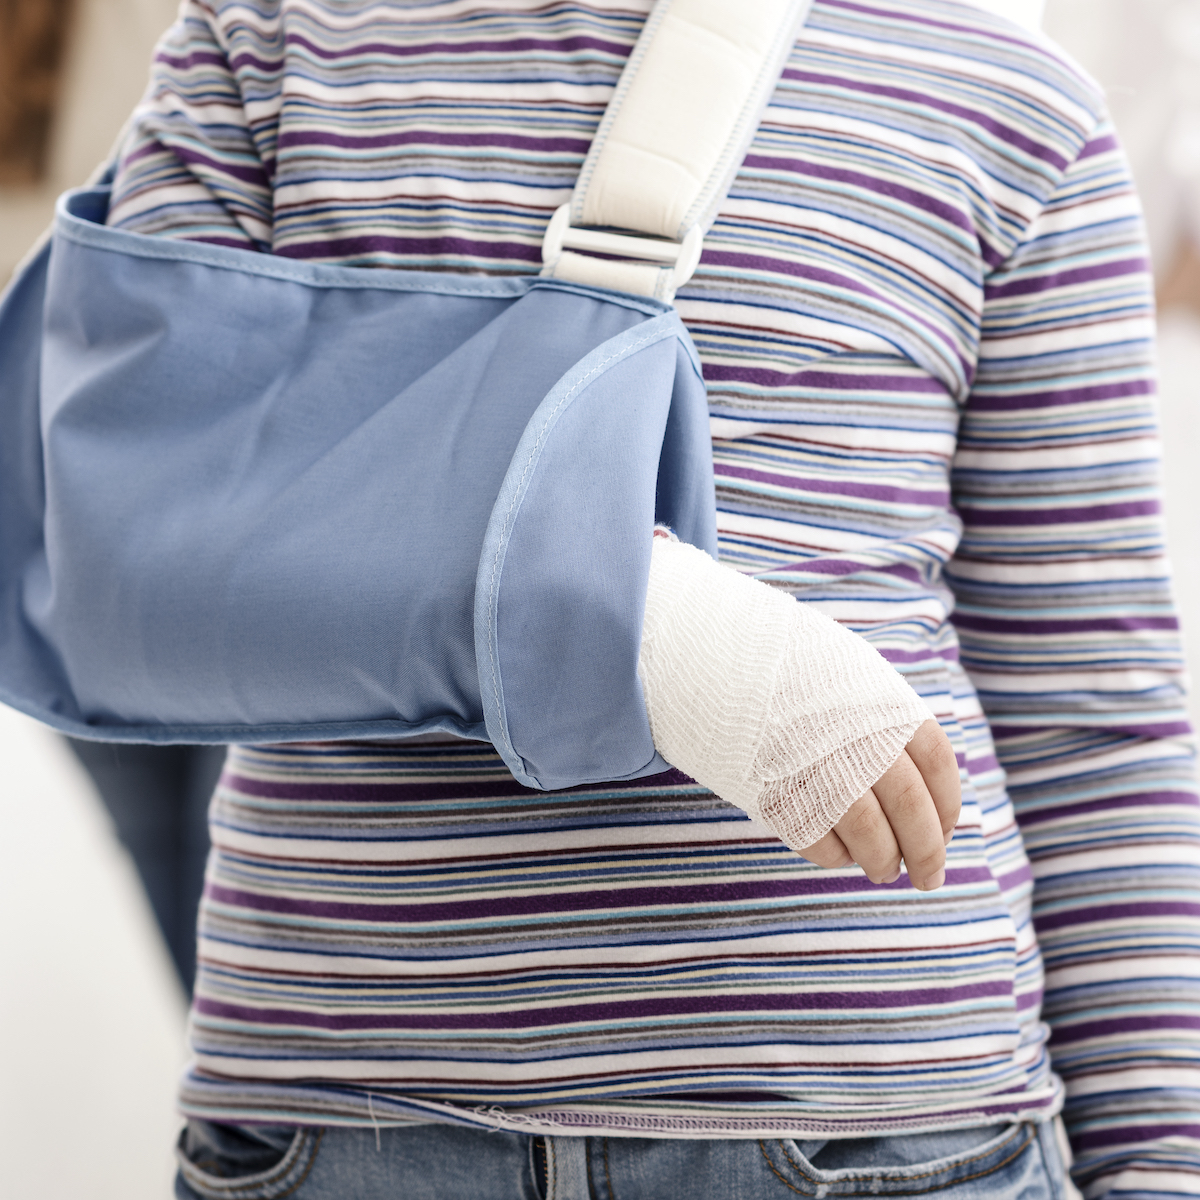 An Unexpected Fall? You Can Help–Here Are Some Gifts For A Friend With A Broken Arm